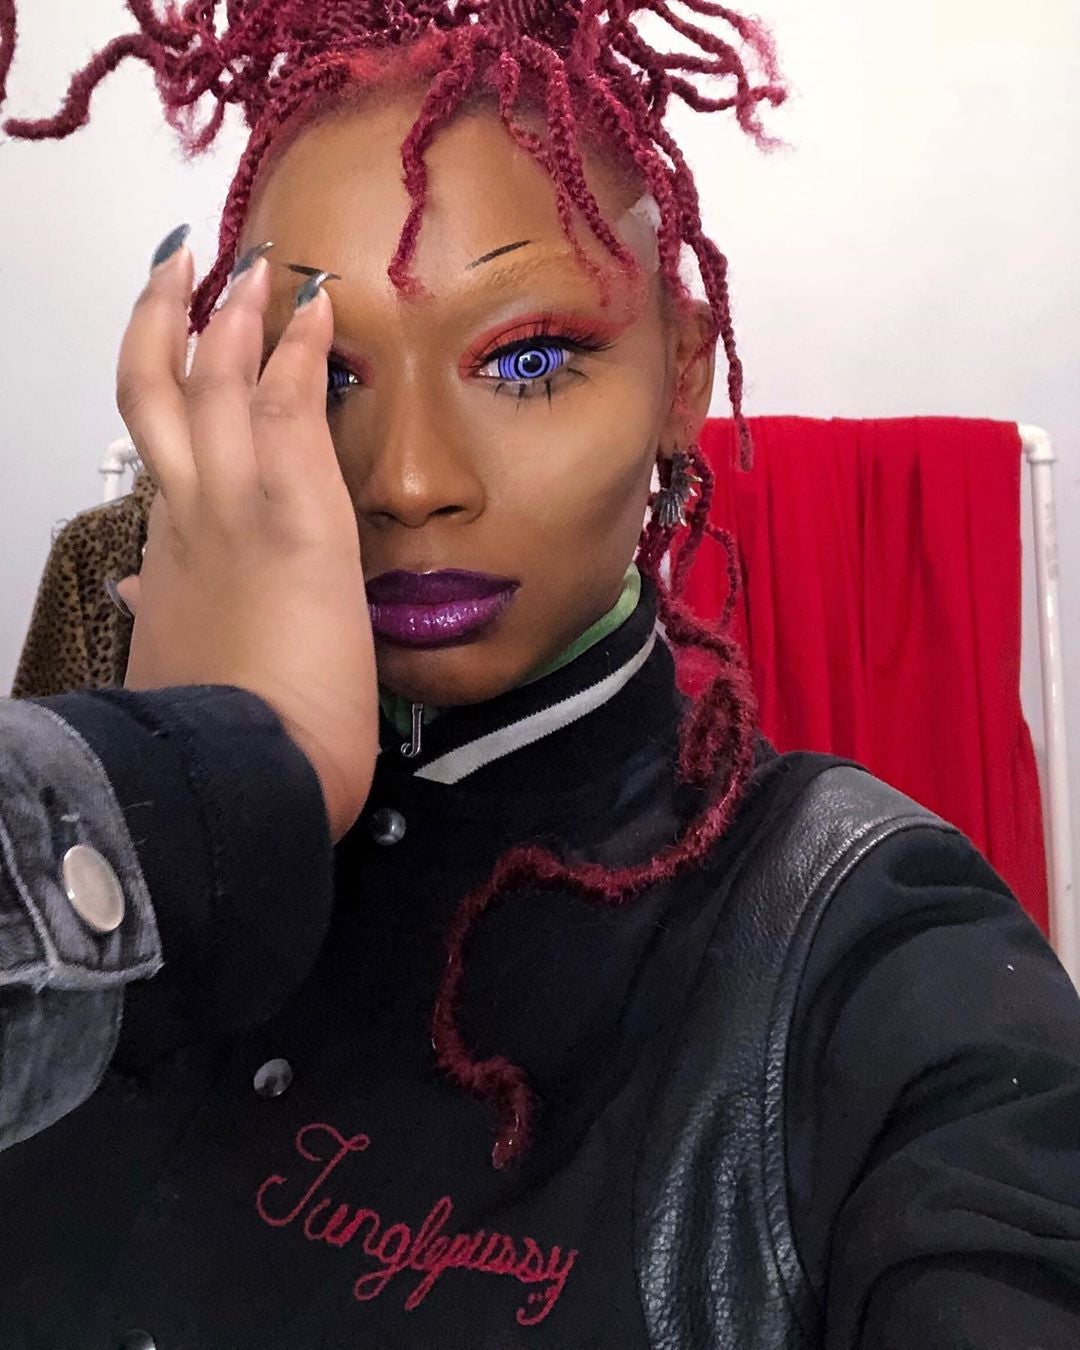 Missy Elliott, Yara Shahidi, Monica And Other Celebs Brought The Beauty This Week